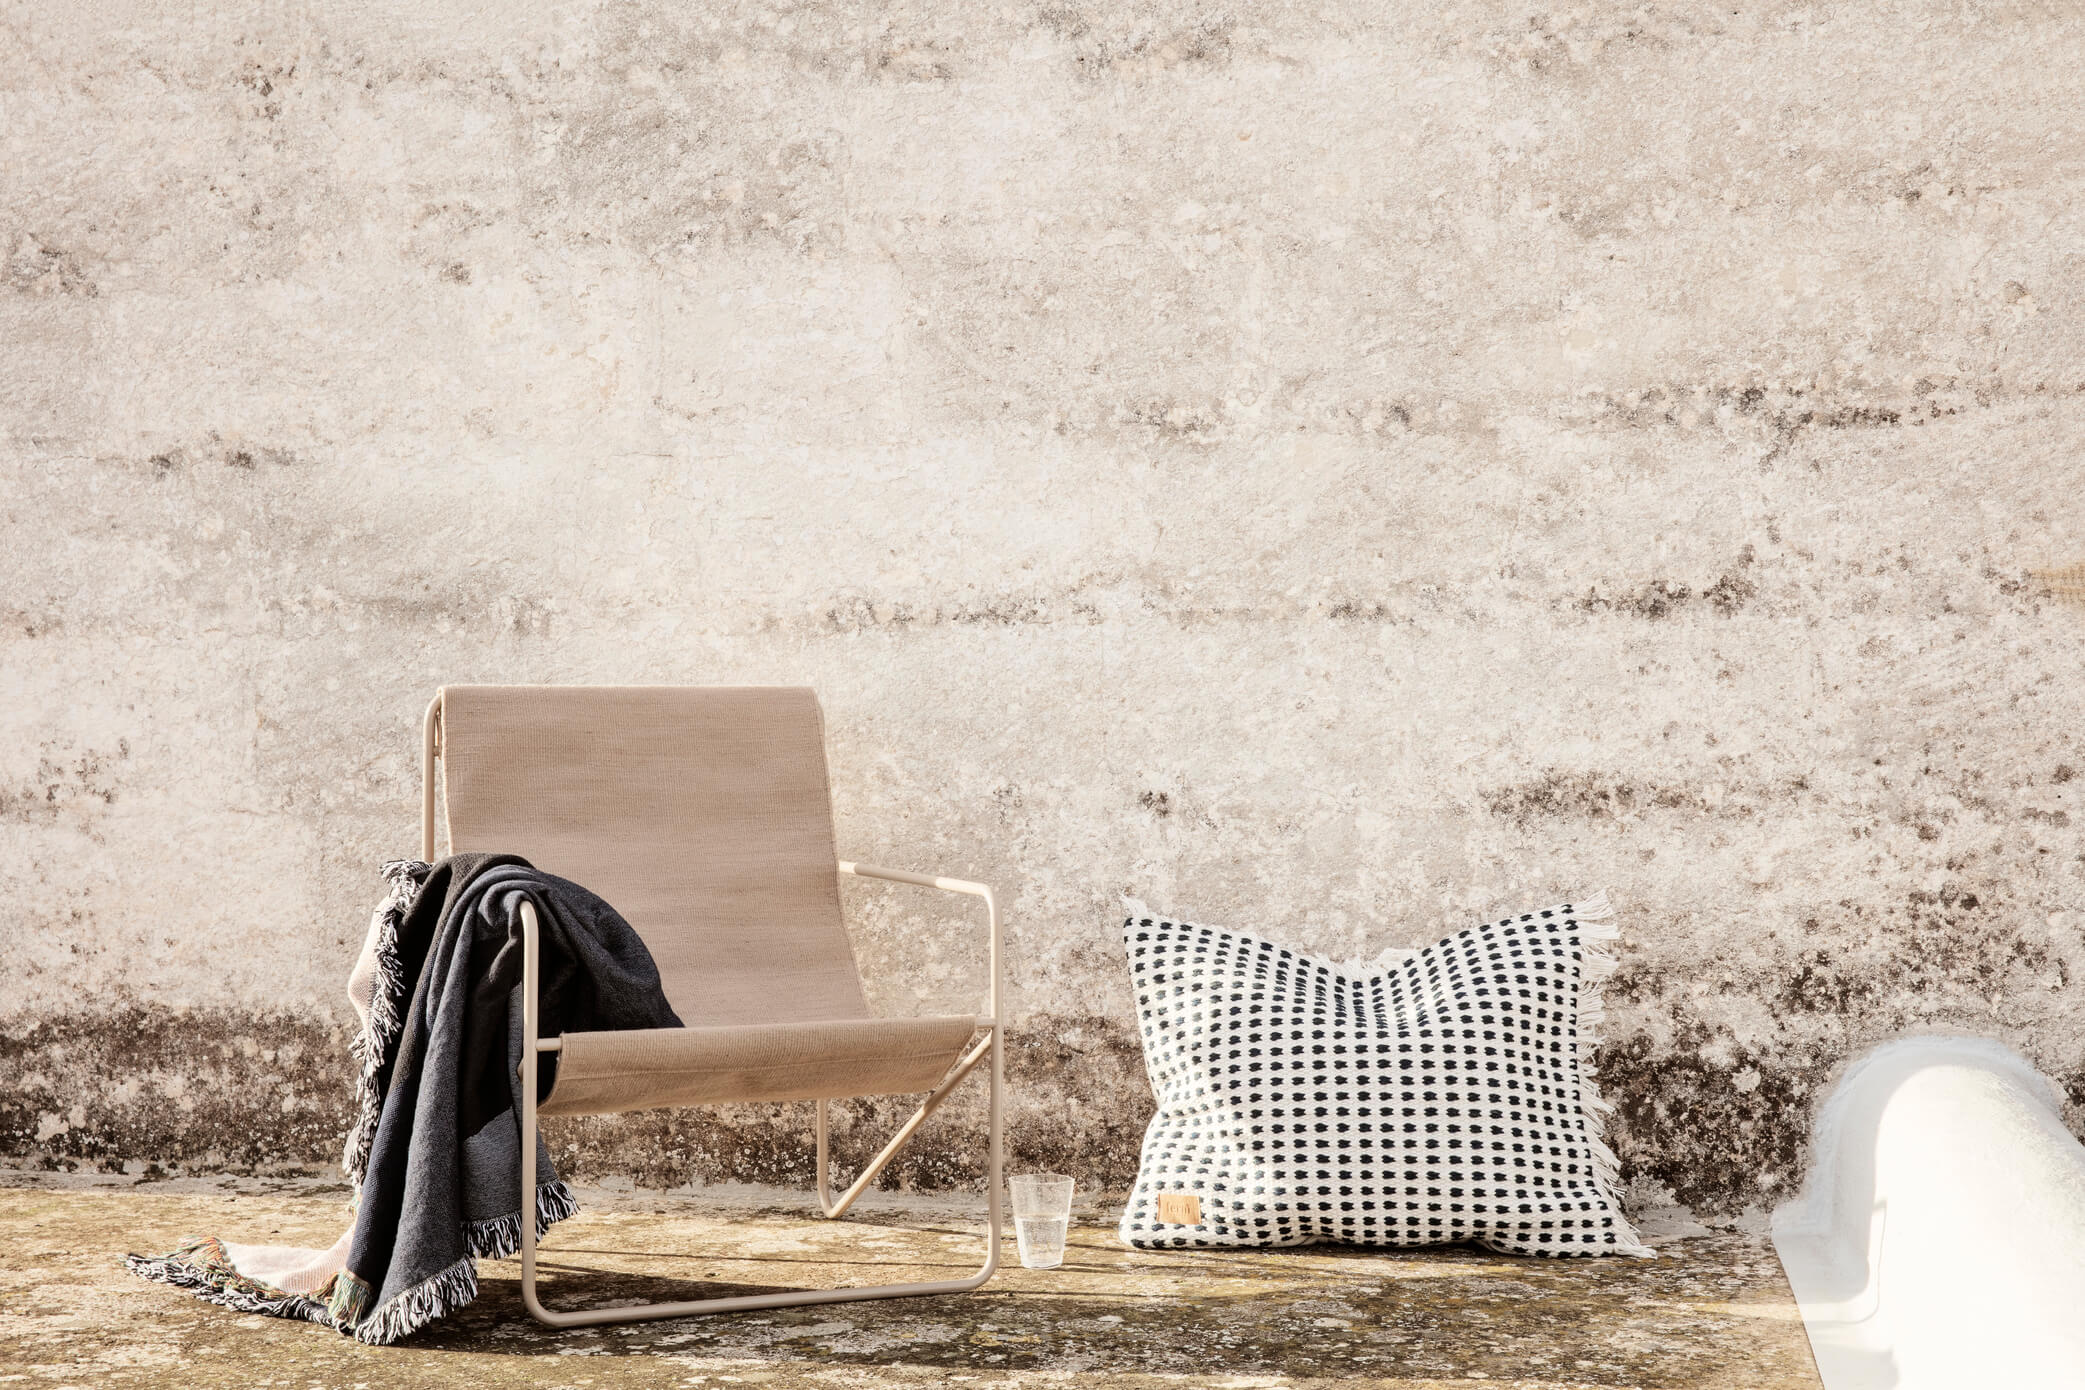 Way Cushion | Off-white / Blue | Recycled Fabric | by ferm LIVING - Lifestory - ferm LIVING